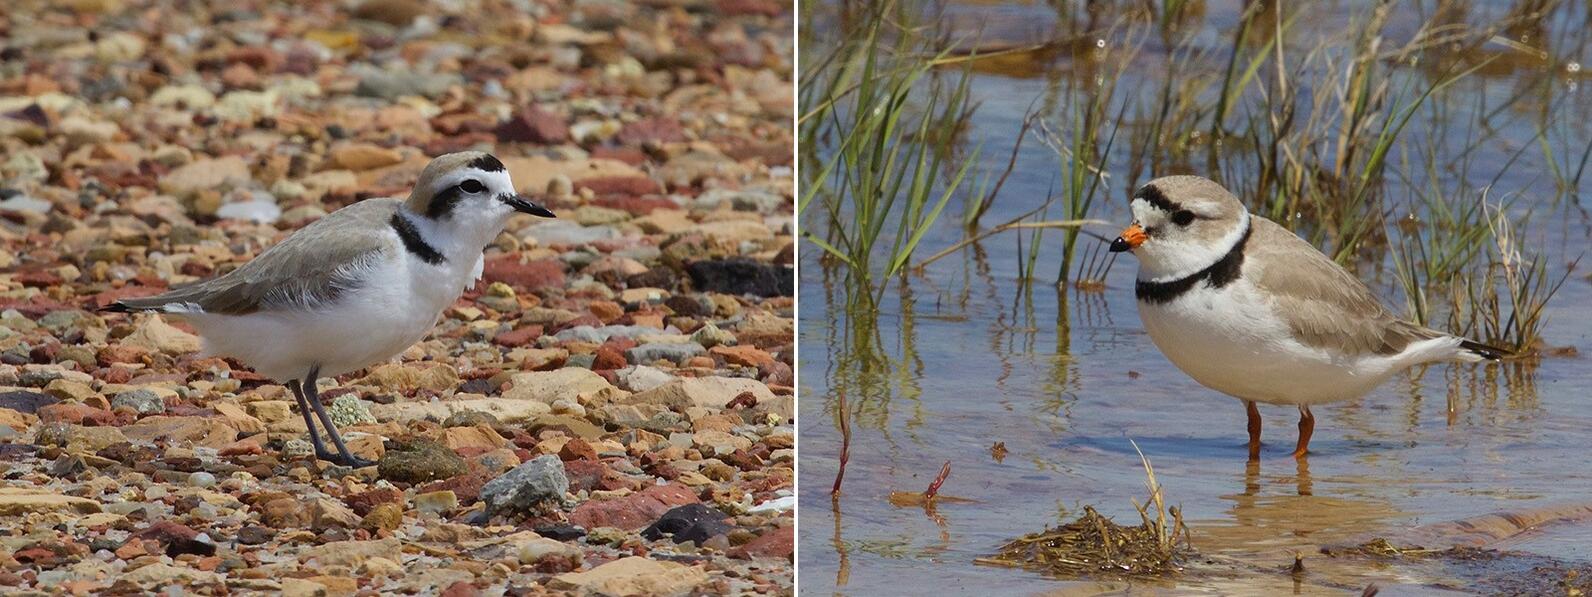 Snowy Plover left, Piping Plover right